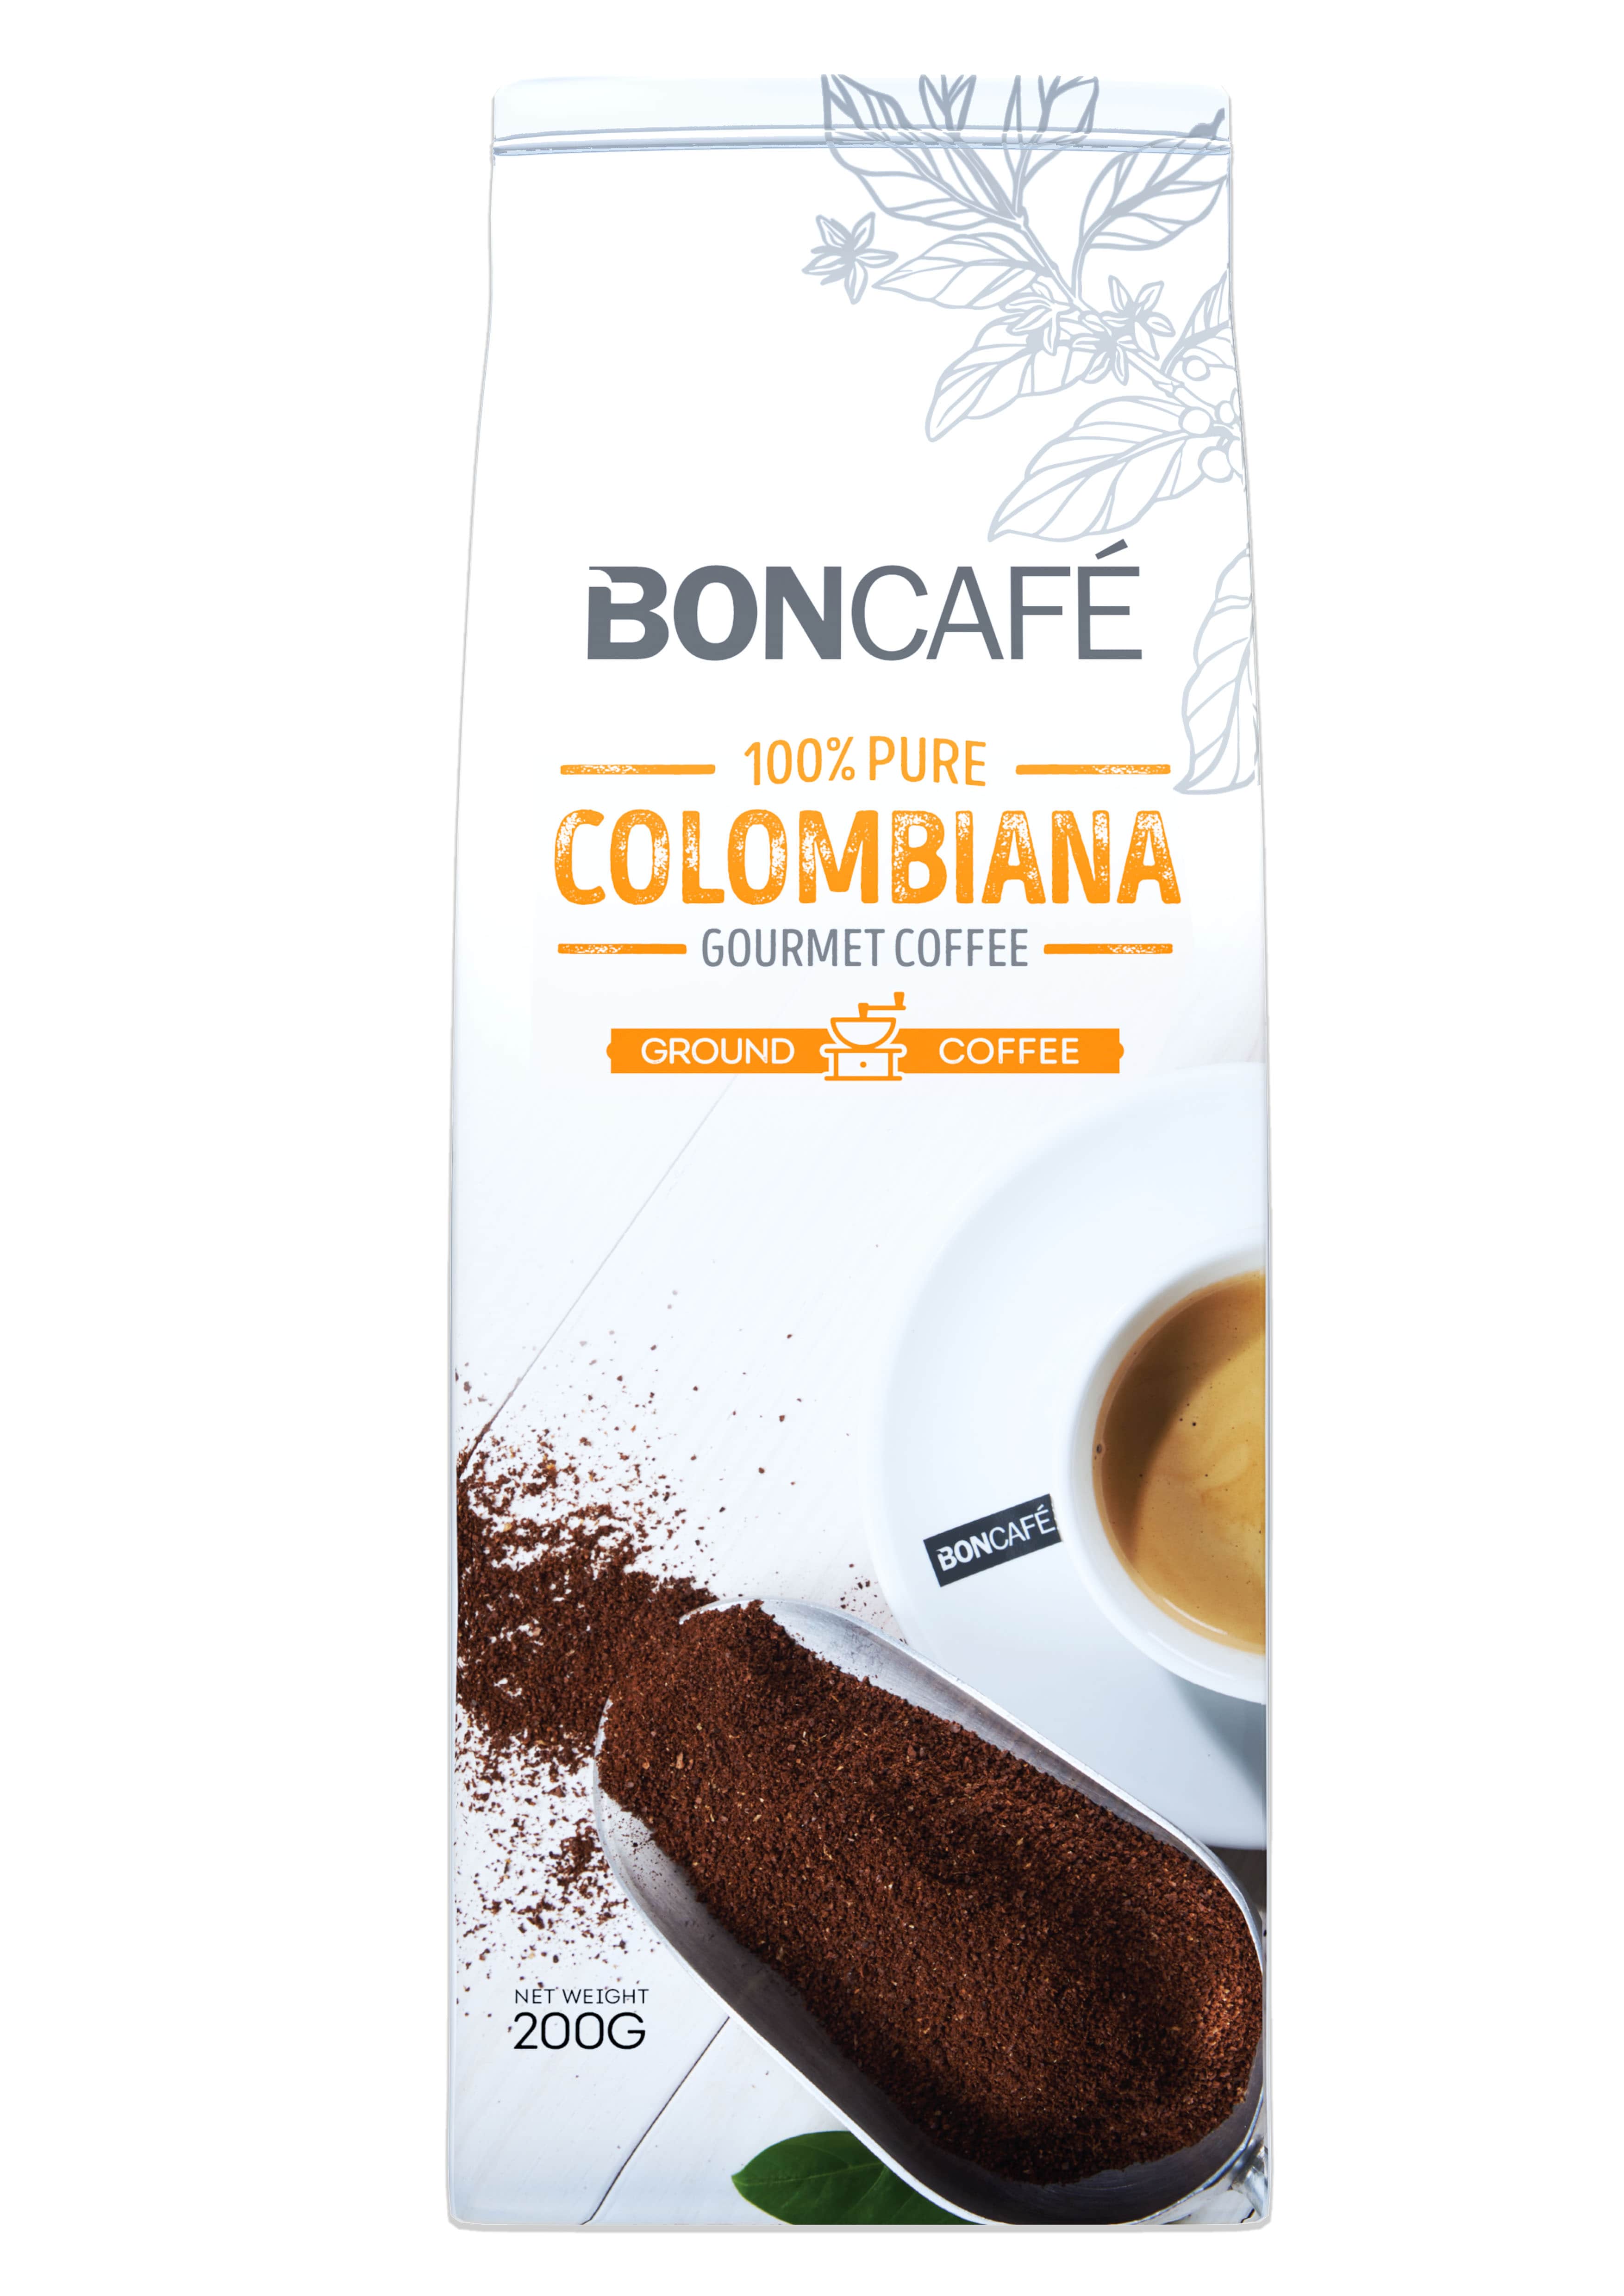 BONCAFÉ - GOURMET COLLECTION GROUND COFFEE: COLOMBIANA BLEND